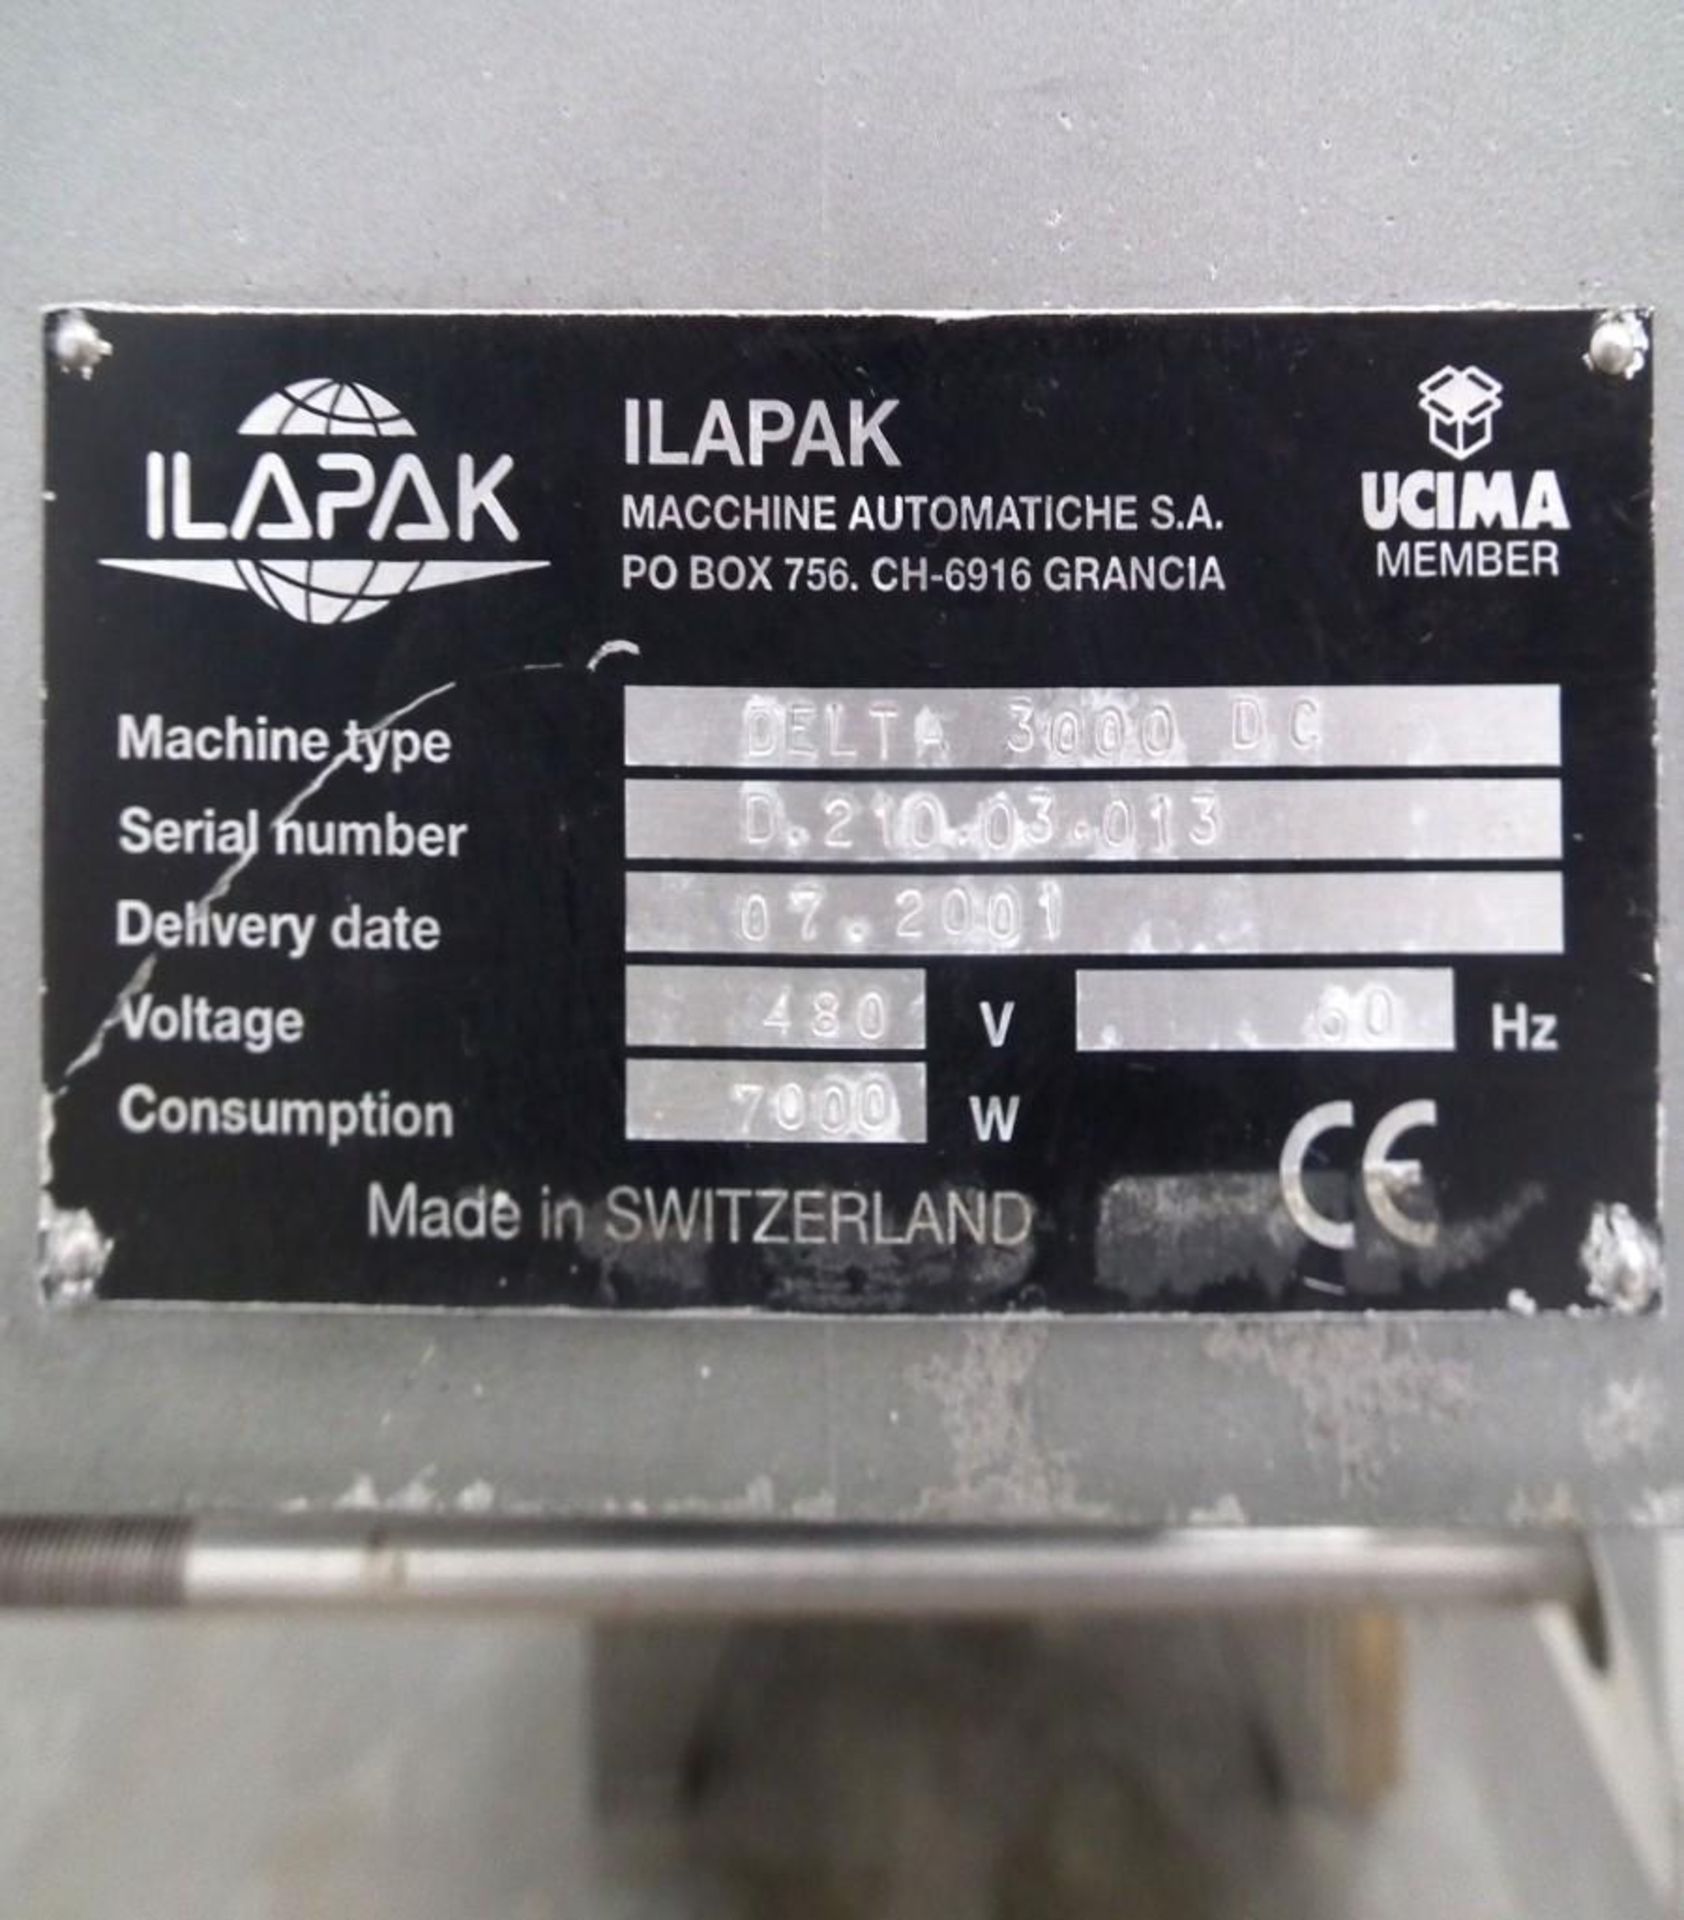 Ilapak Delta 3000 DC Stainless Wrapper - Image 3 of 7